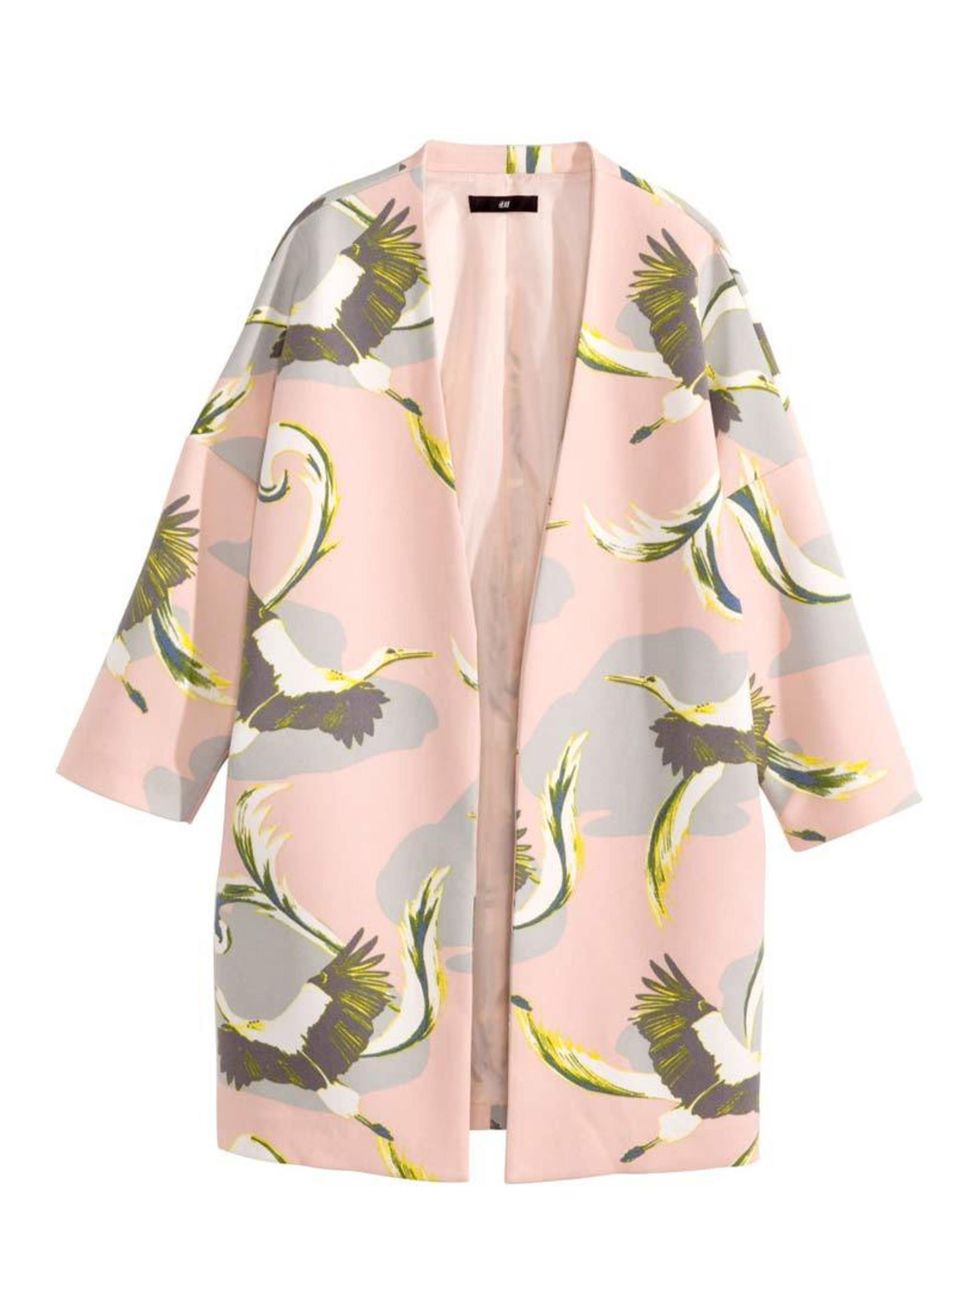 <p>Give your winter wardrobe an instant update for spring.</p>

<p><a href="http://www.hm.com/gb/product/77518?article=77518-A" target="_blank">H&M</a> coat, £29.99</p>